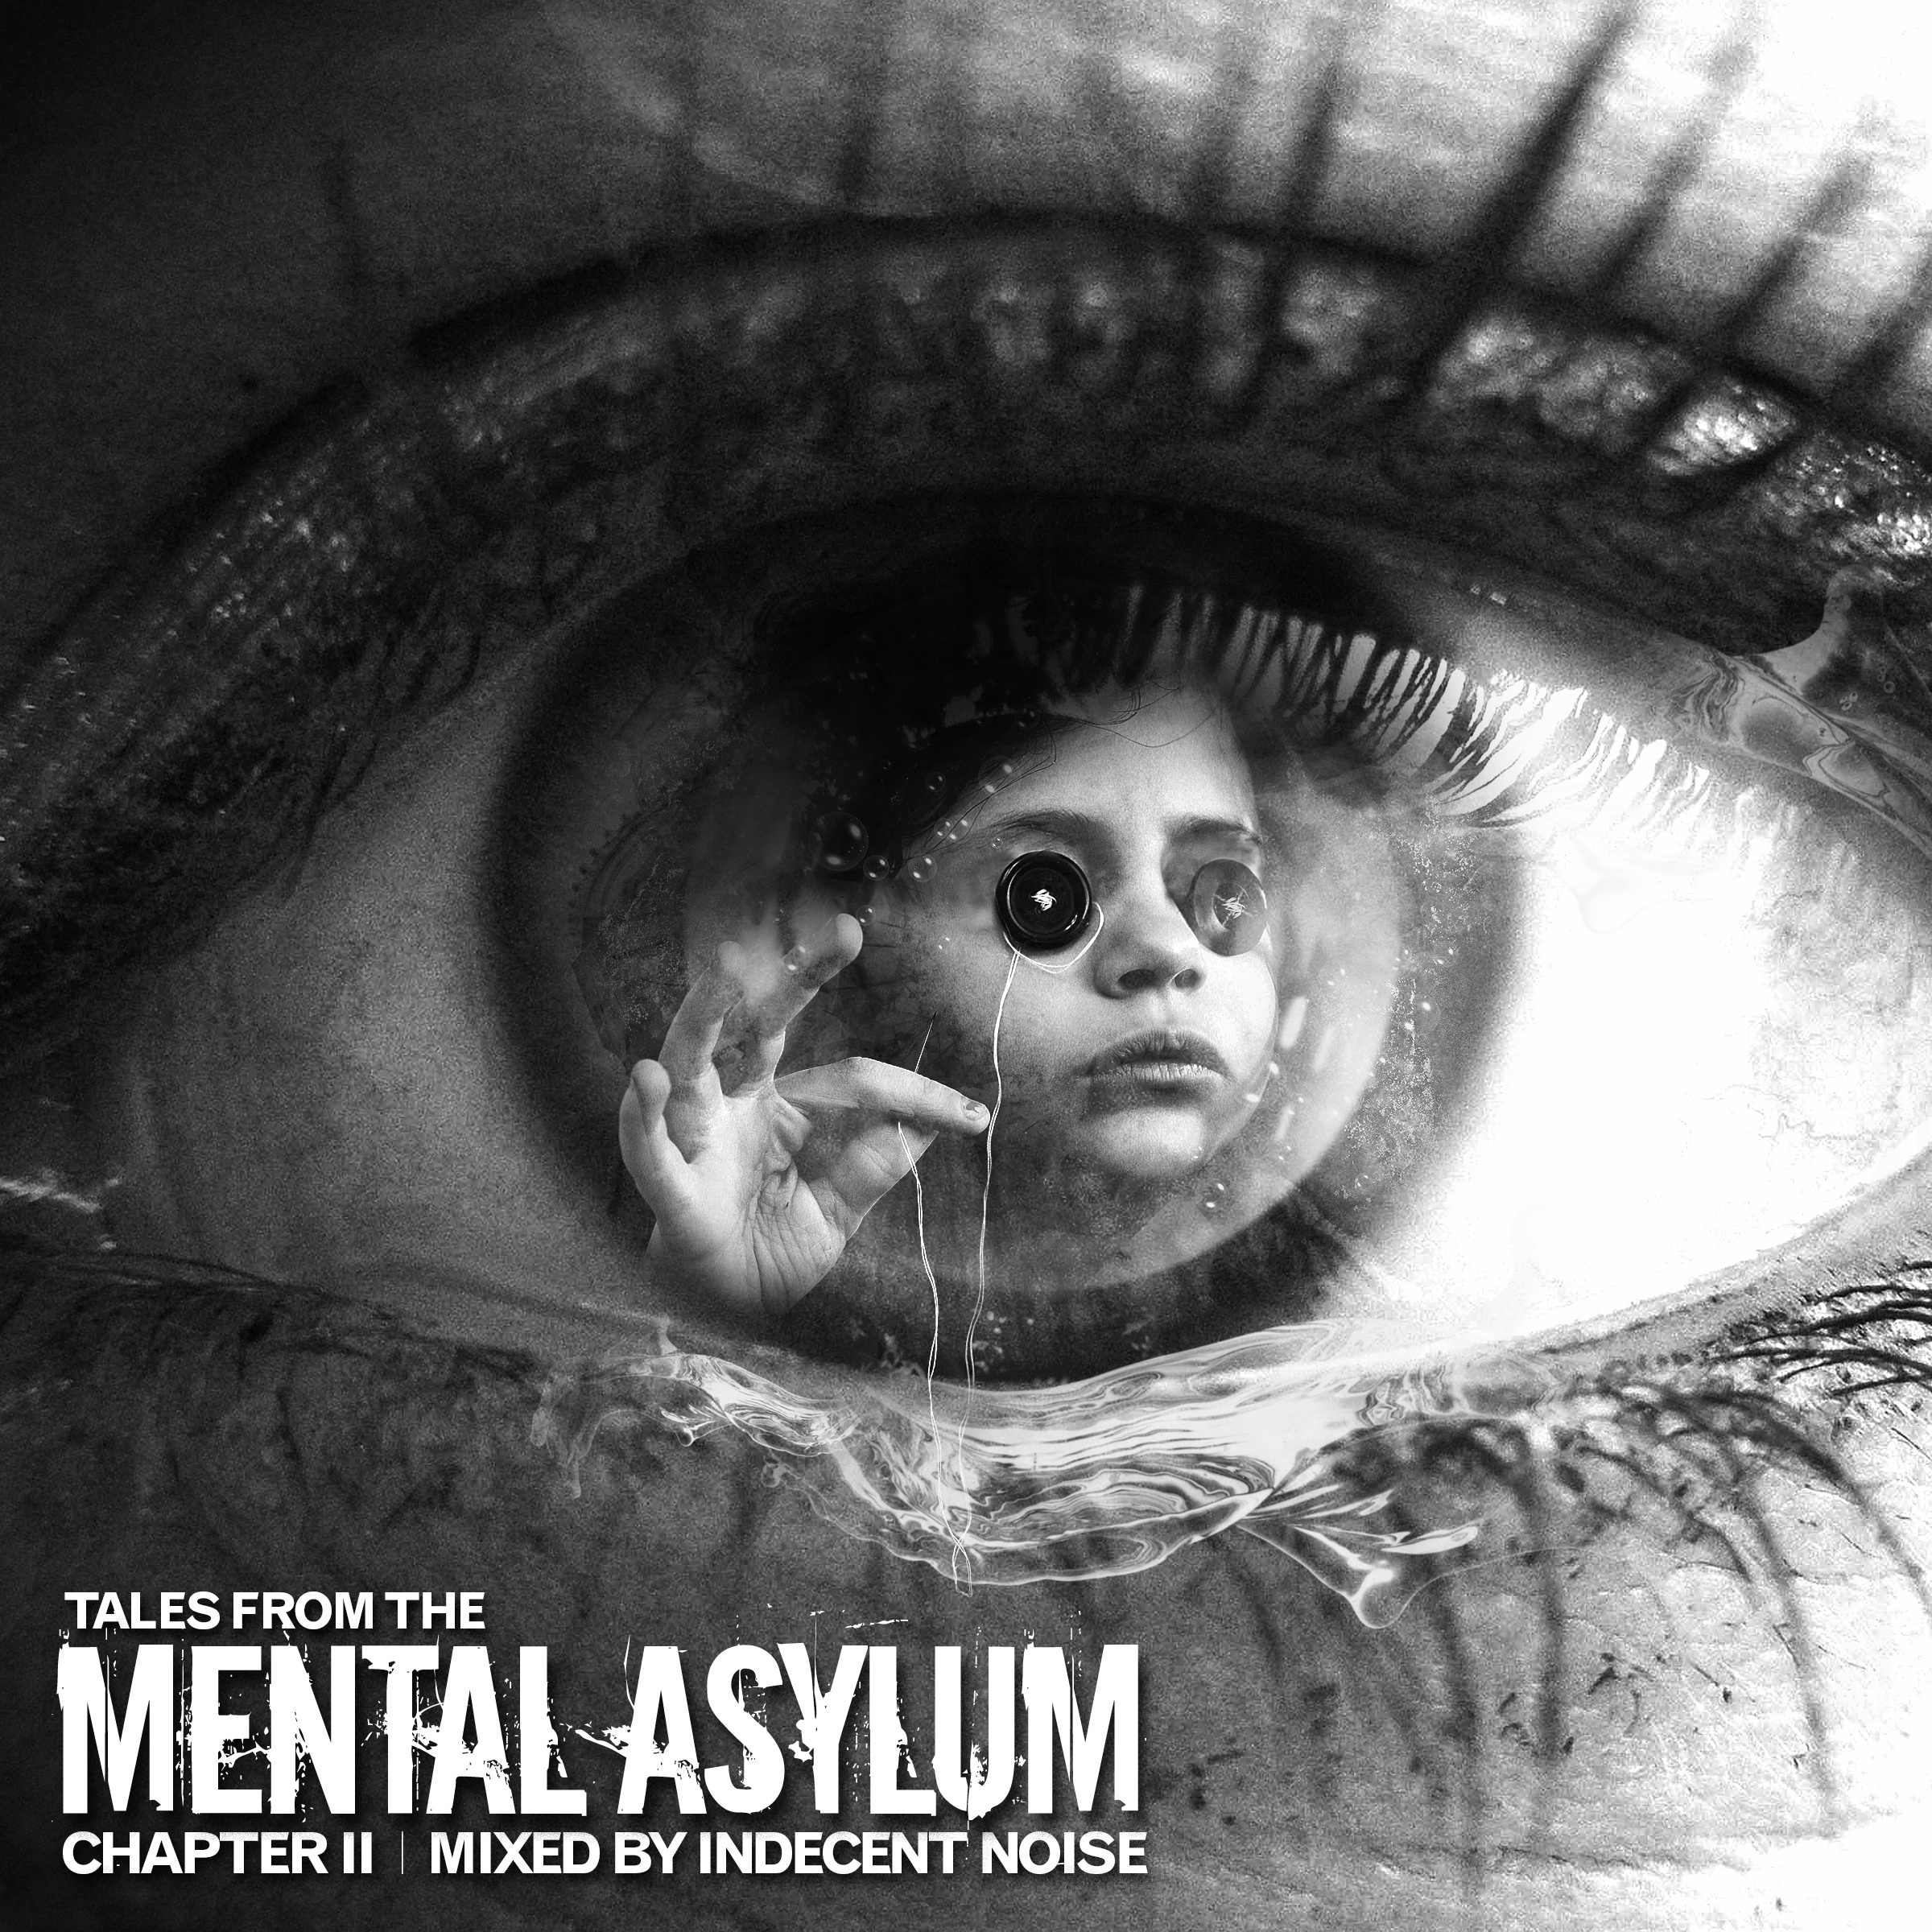 Tales From The Mental Asylum: Chapter II